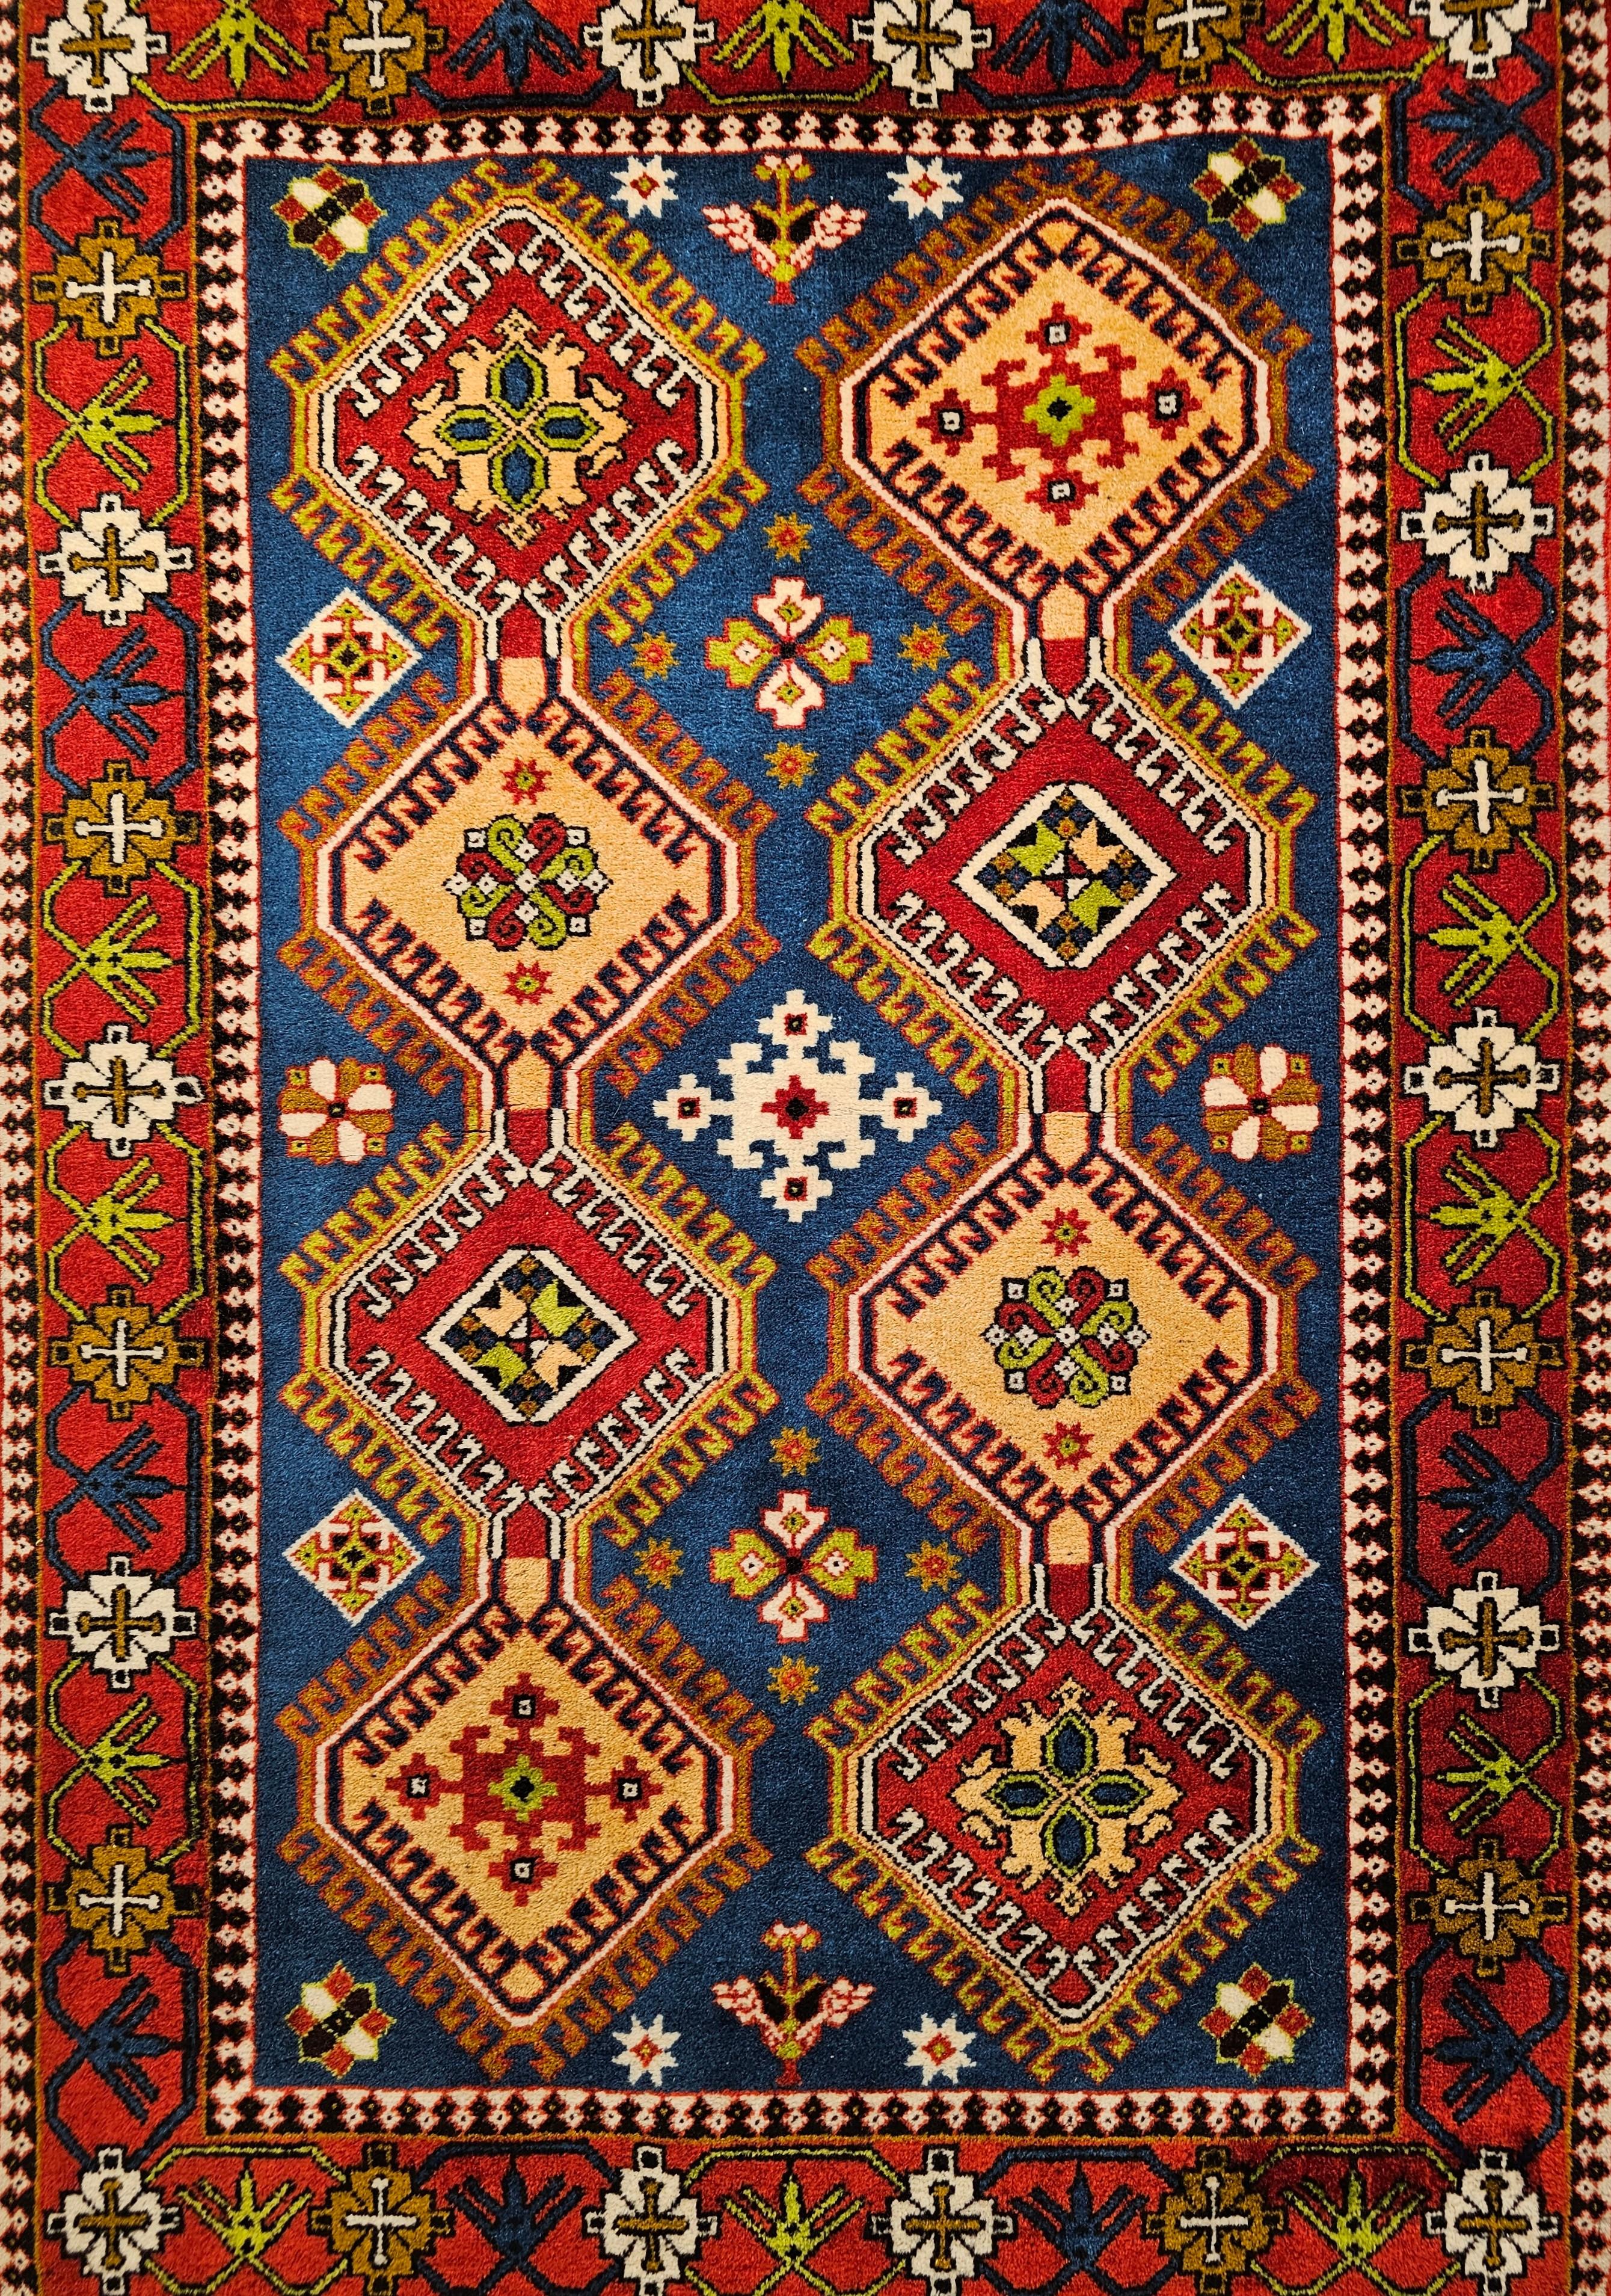 A beautiful mid century Persian Shiraz Yalameh tribal rug in a geometric allover pattern  in French blue,  red, yellow, and ivory colors.  The design consists of two columns of connected latch hook medallions in bright colors of yellow, and red set